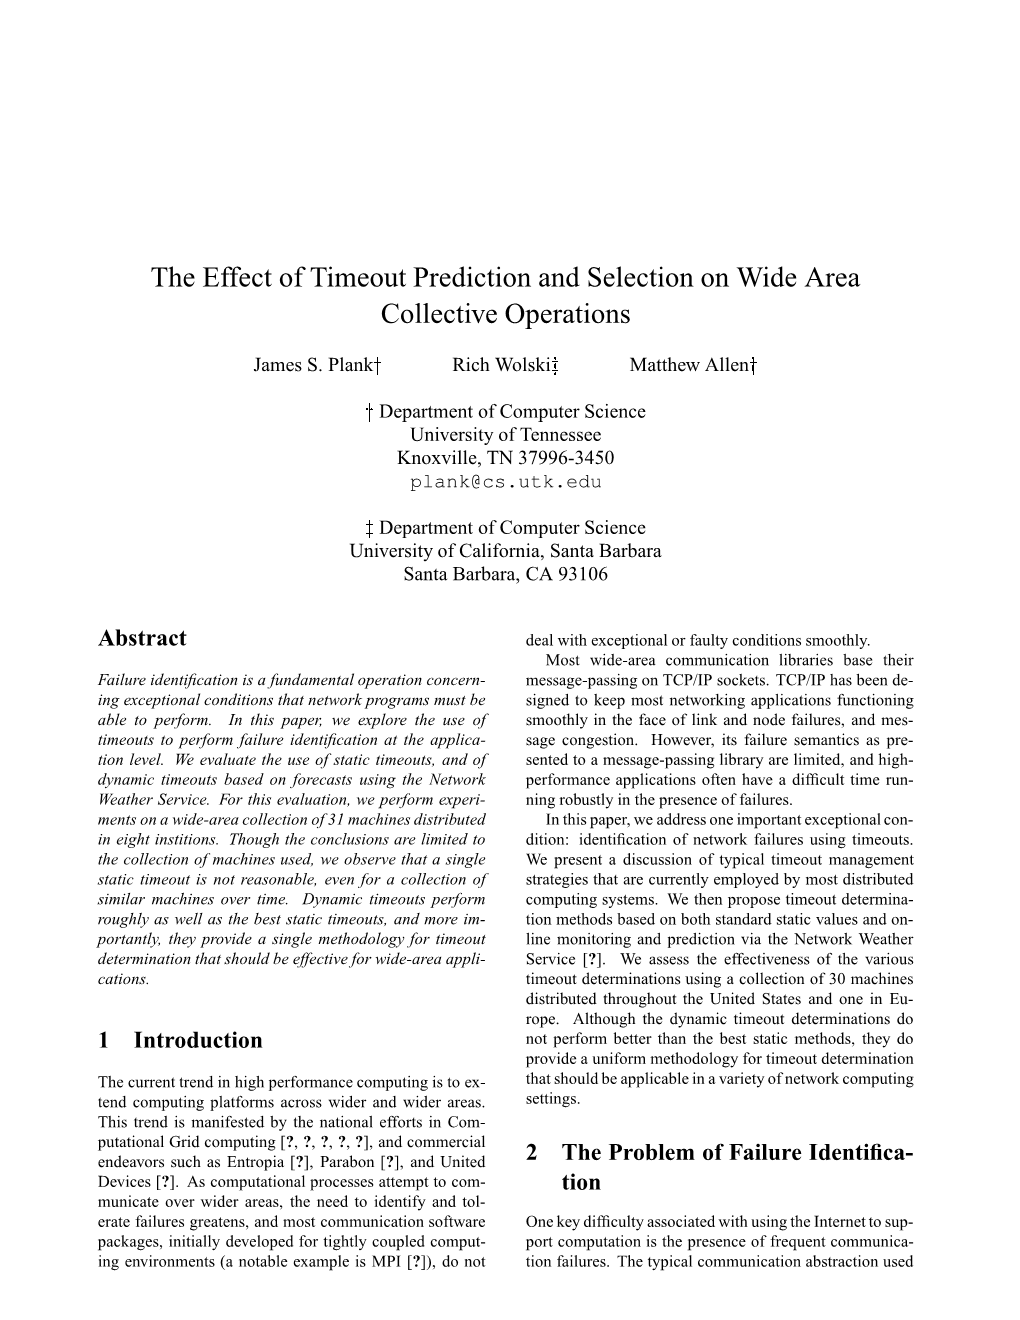 The Effect of Timeout Prediction and Selection on Wide Area Collective Operations